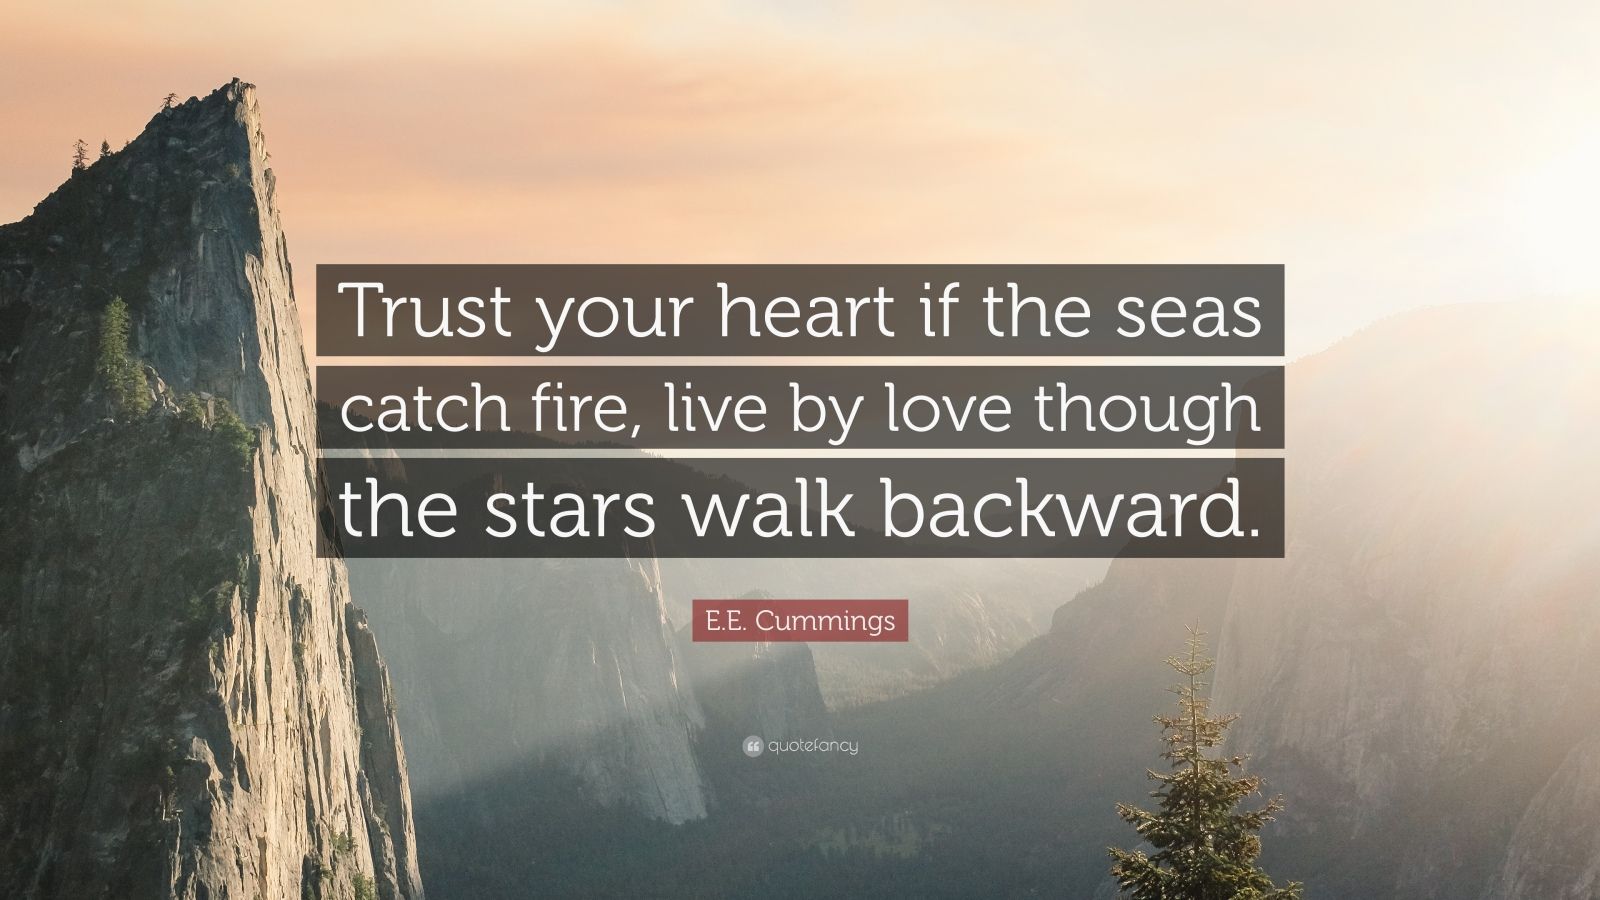 E.E. Cummings Quote: “Trust your heart if the seas catch fire, live by love though ...